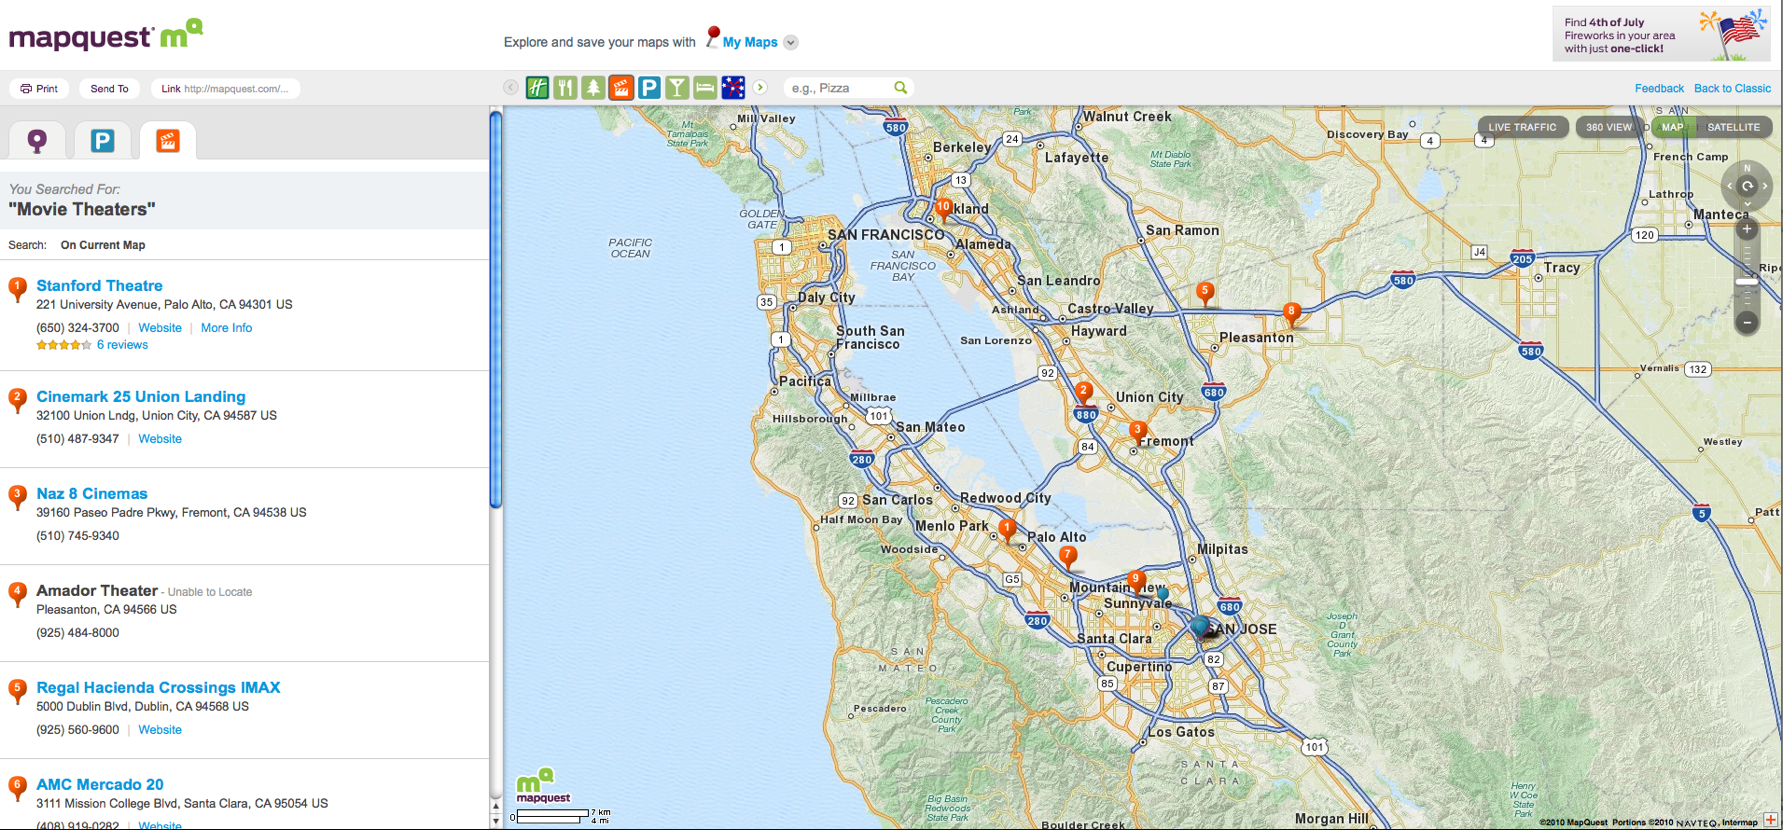 map-of-san-jose-california-mapquest.png